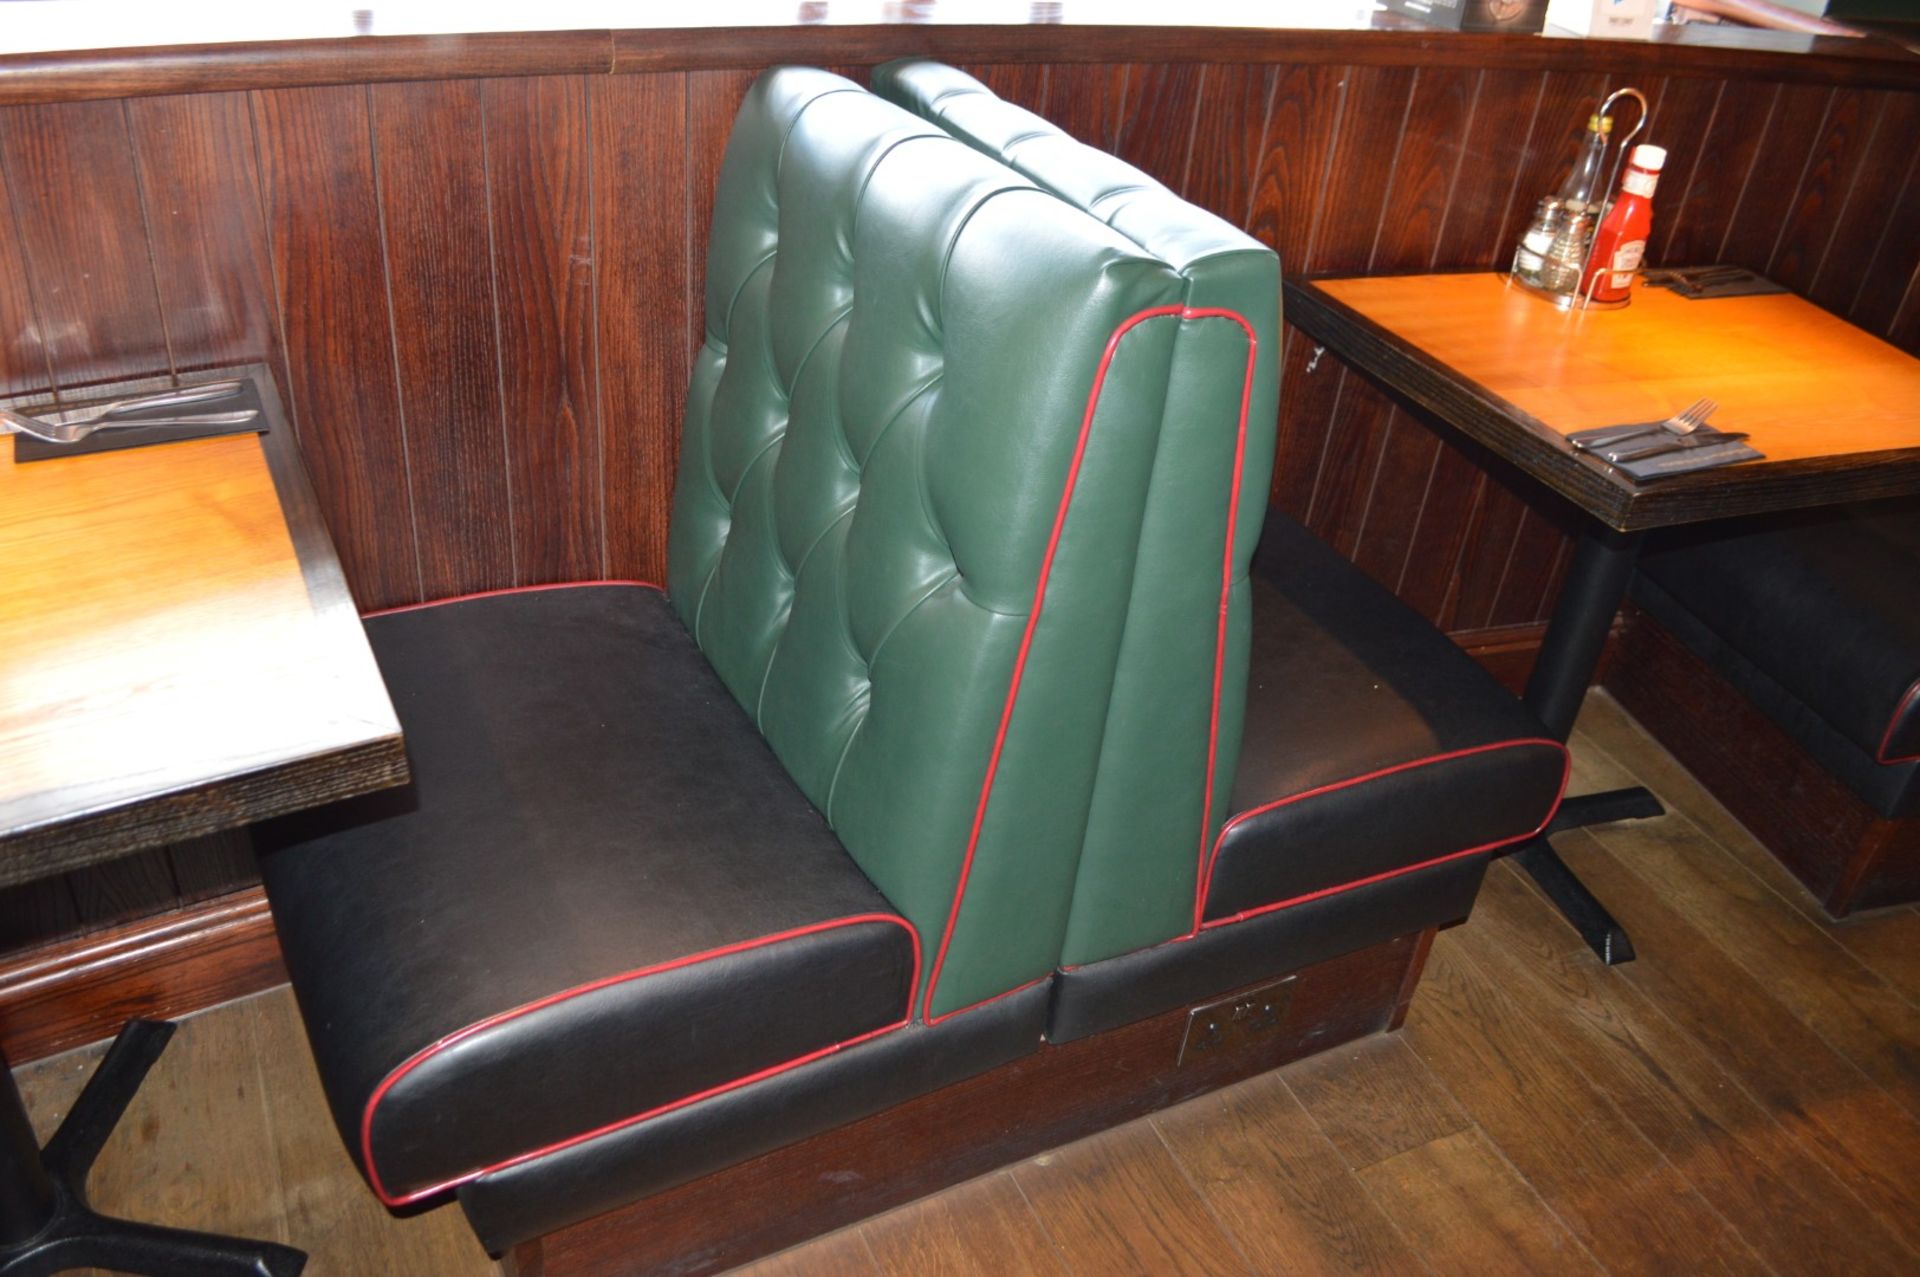 4 x Sections of Restaurant Booth Seating - Include 2 x Single Seats and 2 x Single Back to Back Seat - Image 5 of 12